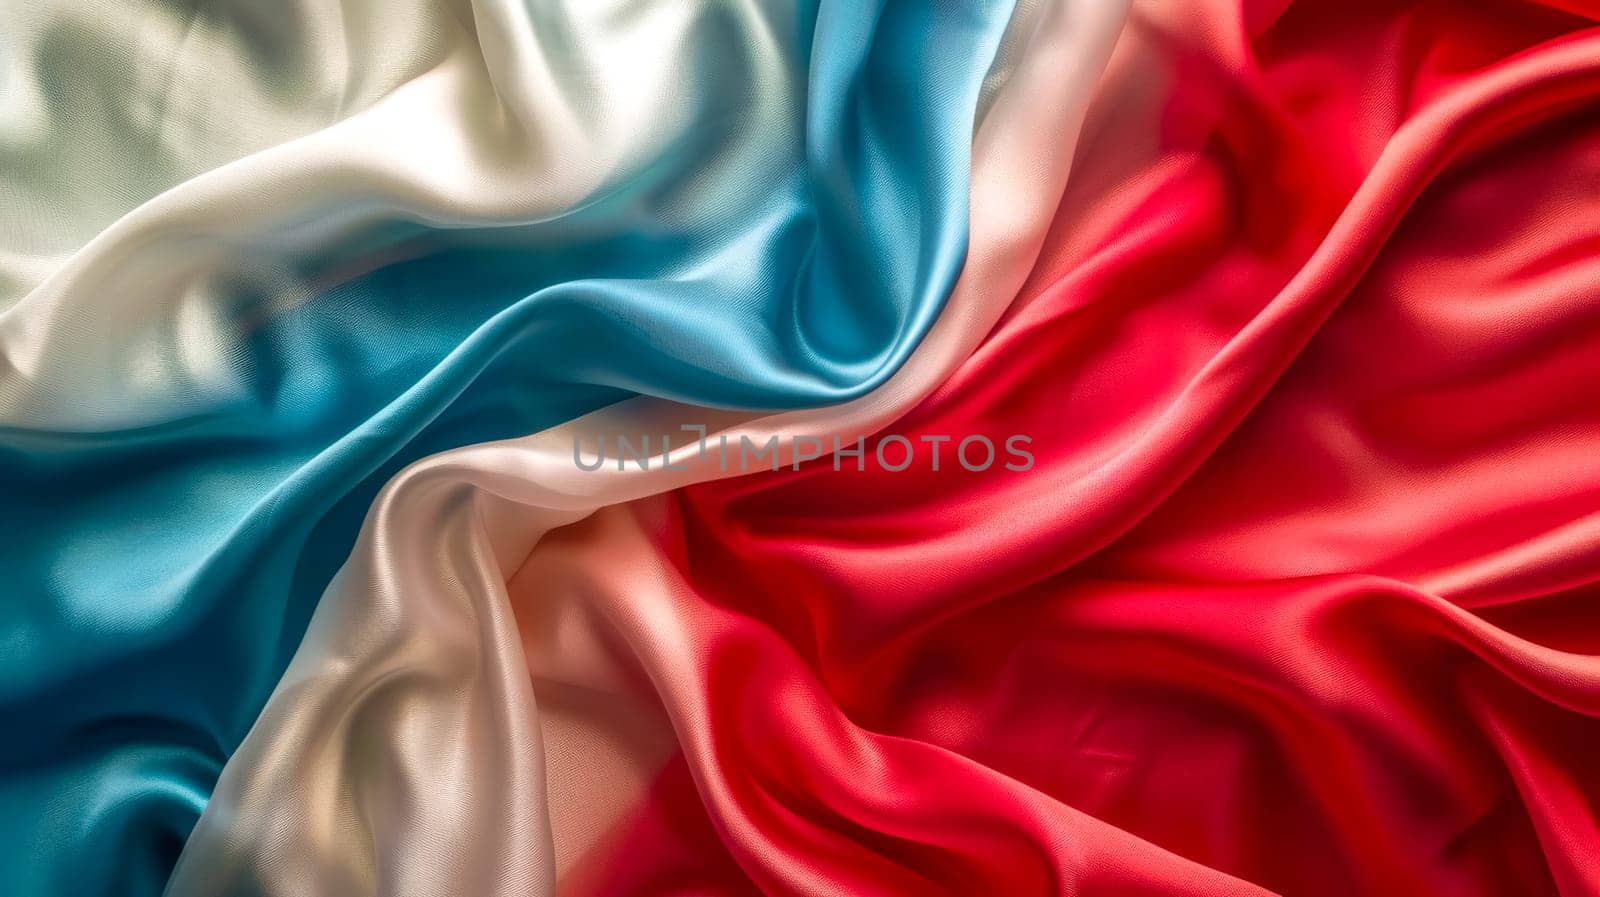 Elegant drapery of satin fabric in red, white, and blue creating a flowing abstract pattern